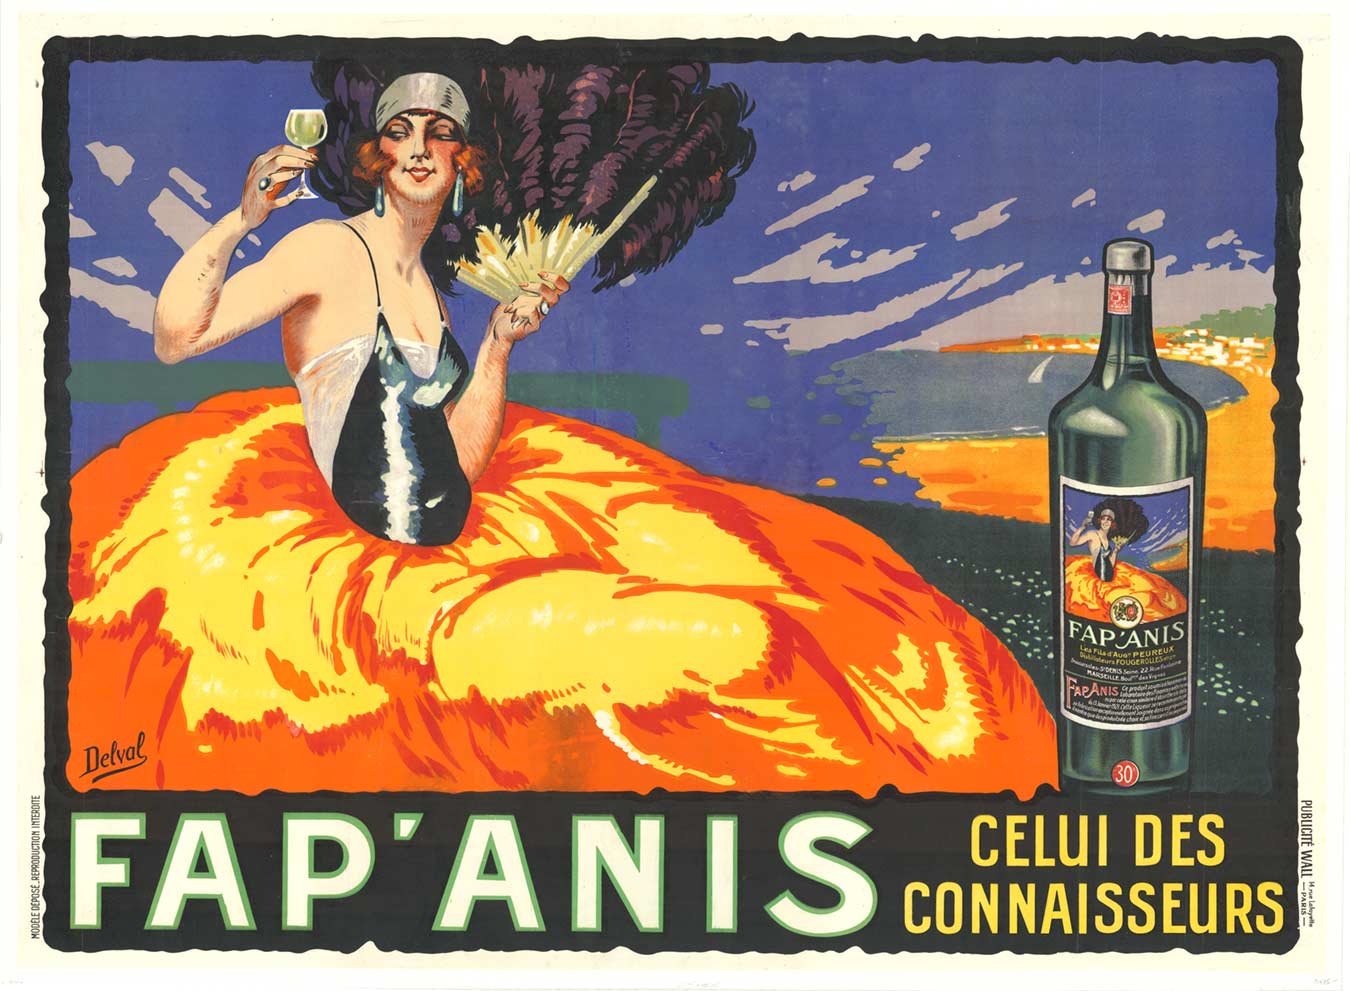 Fap Anis - Celui Des Connaisseurs; artist Delval, original French antique stone lithograph. Horizontal format. The creation of Pastis was a response to the banning of its infamous, anis-falvoured cousin, absinth in France in 1915.